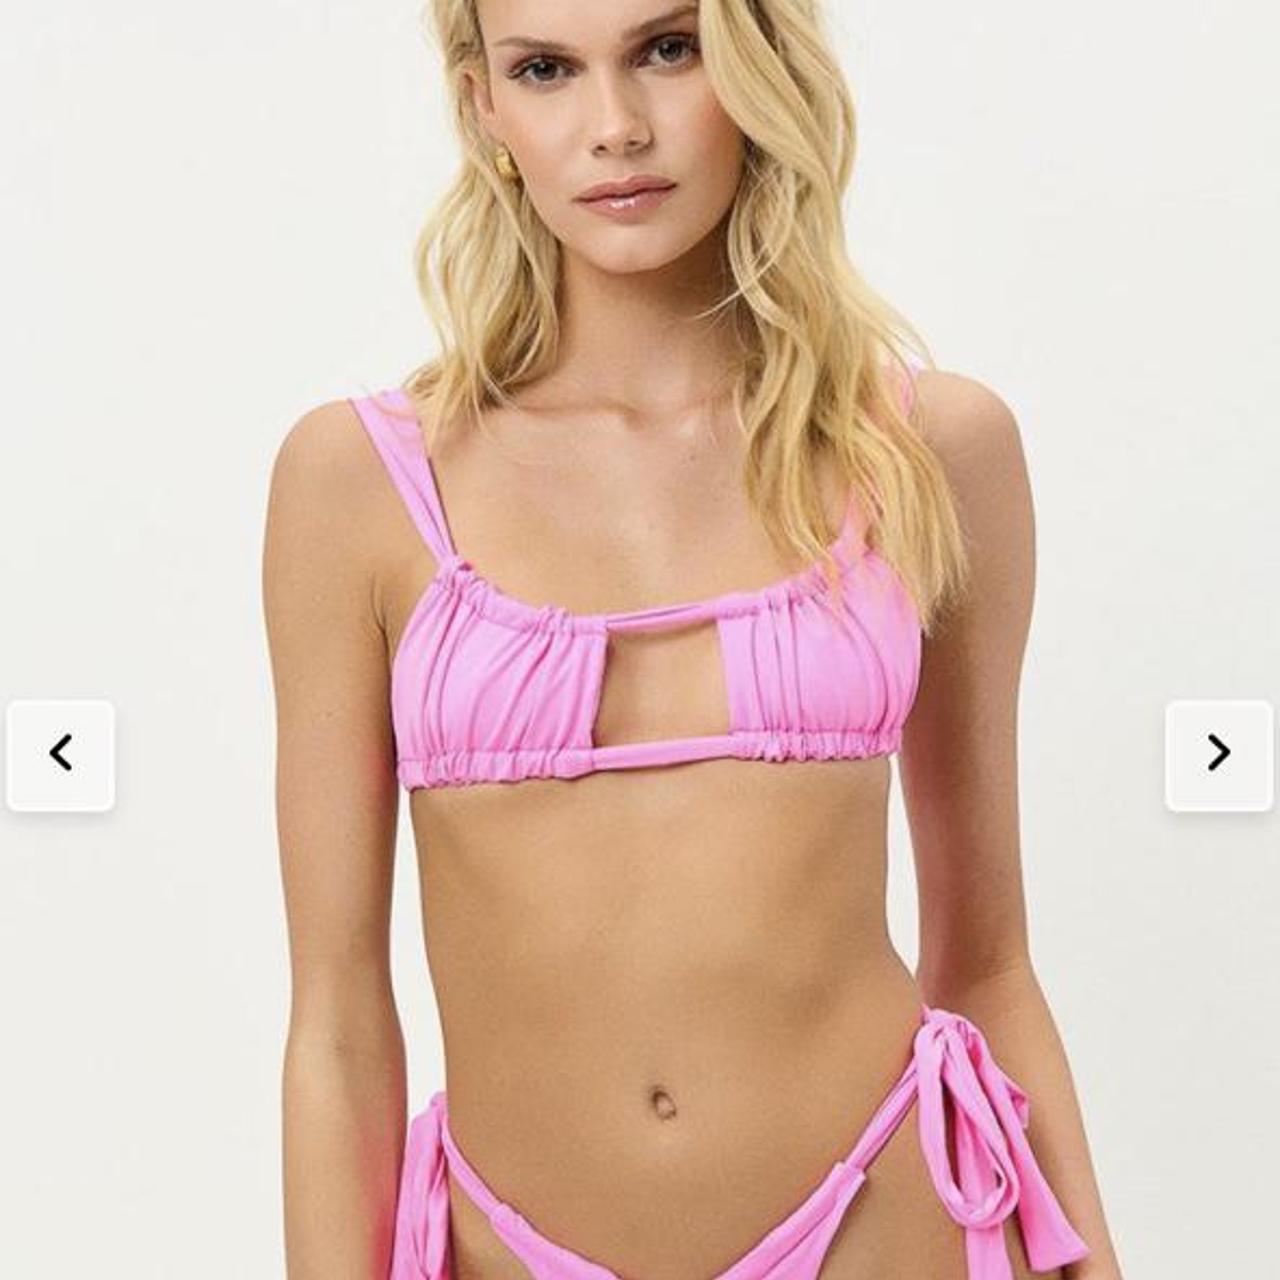 Product Image 4 - Frankie’s Bikinis Pink Set
Top: Small
Bottoms: